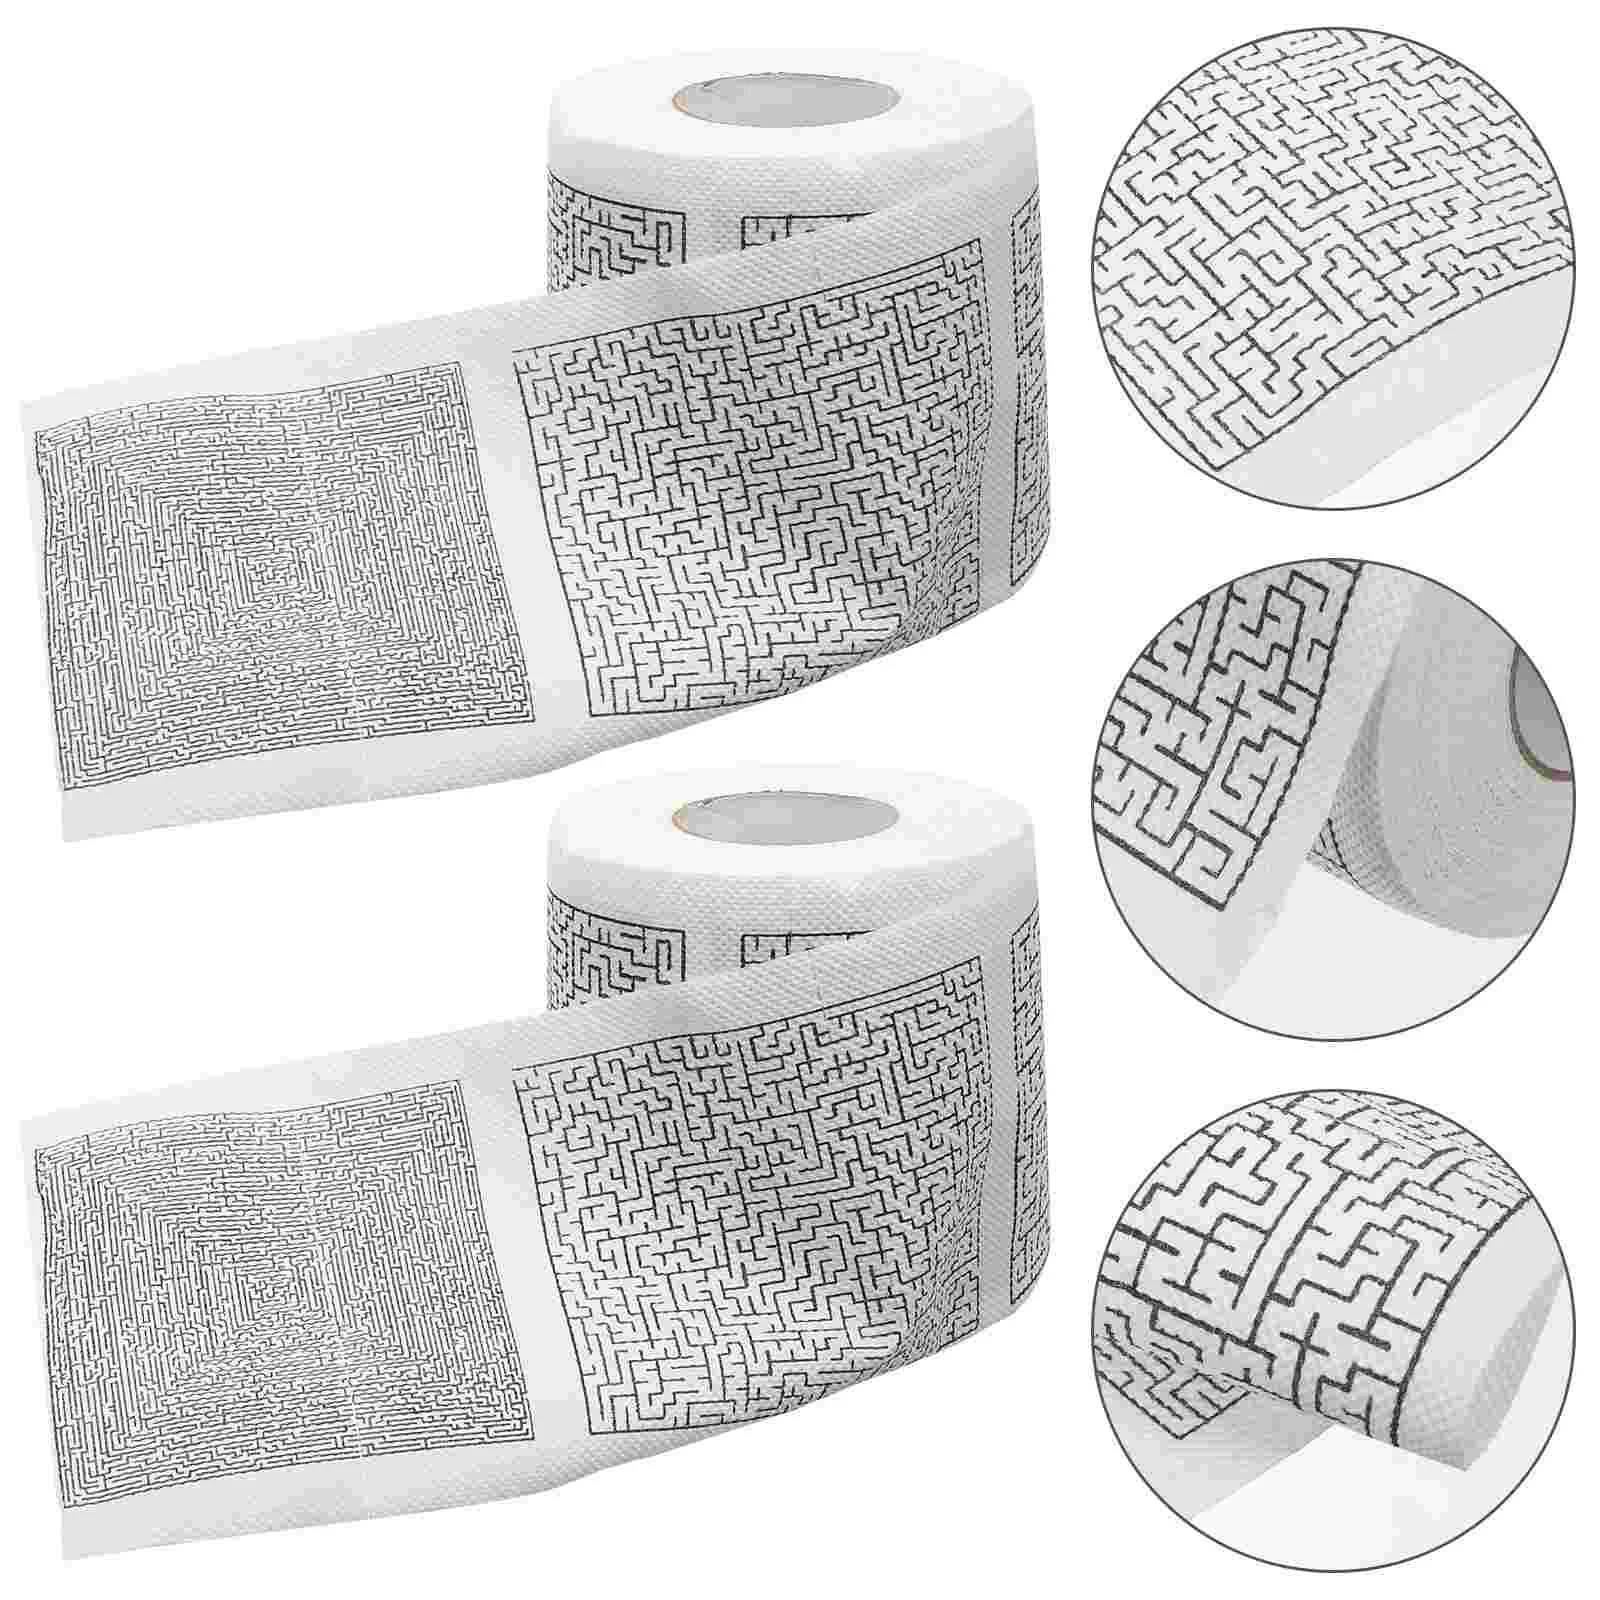 

2 Rolls Printing Toilet Tissue Bathroom Novelty Gift Wood Pulp Printed Paper Napkins